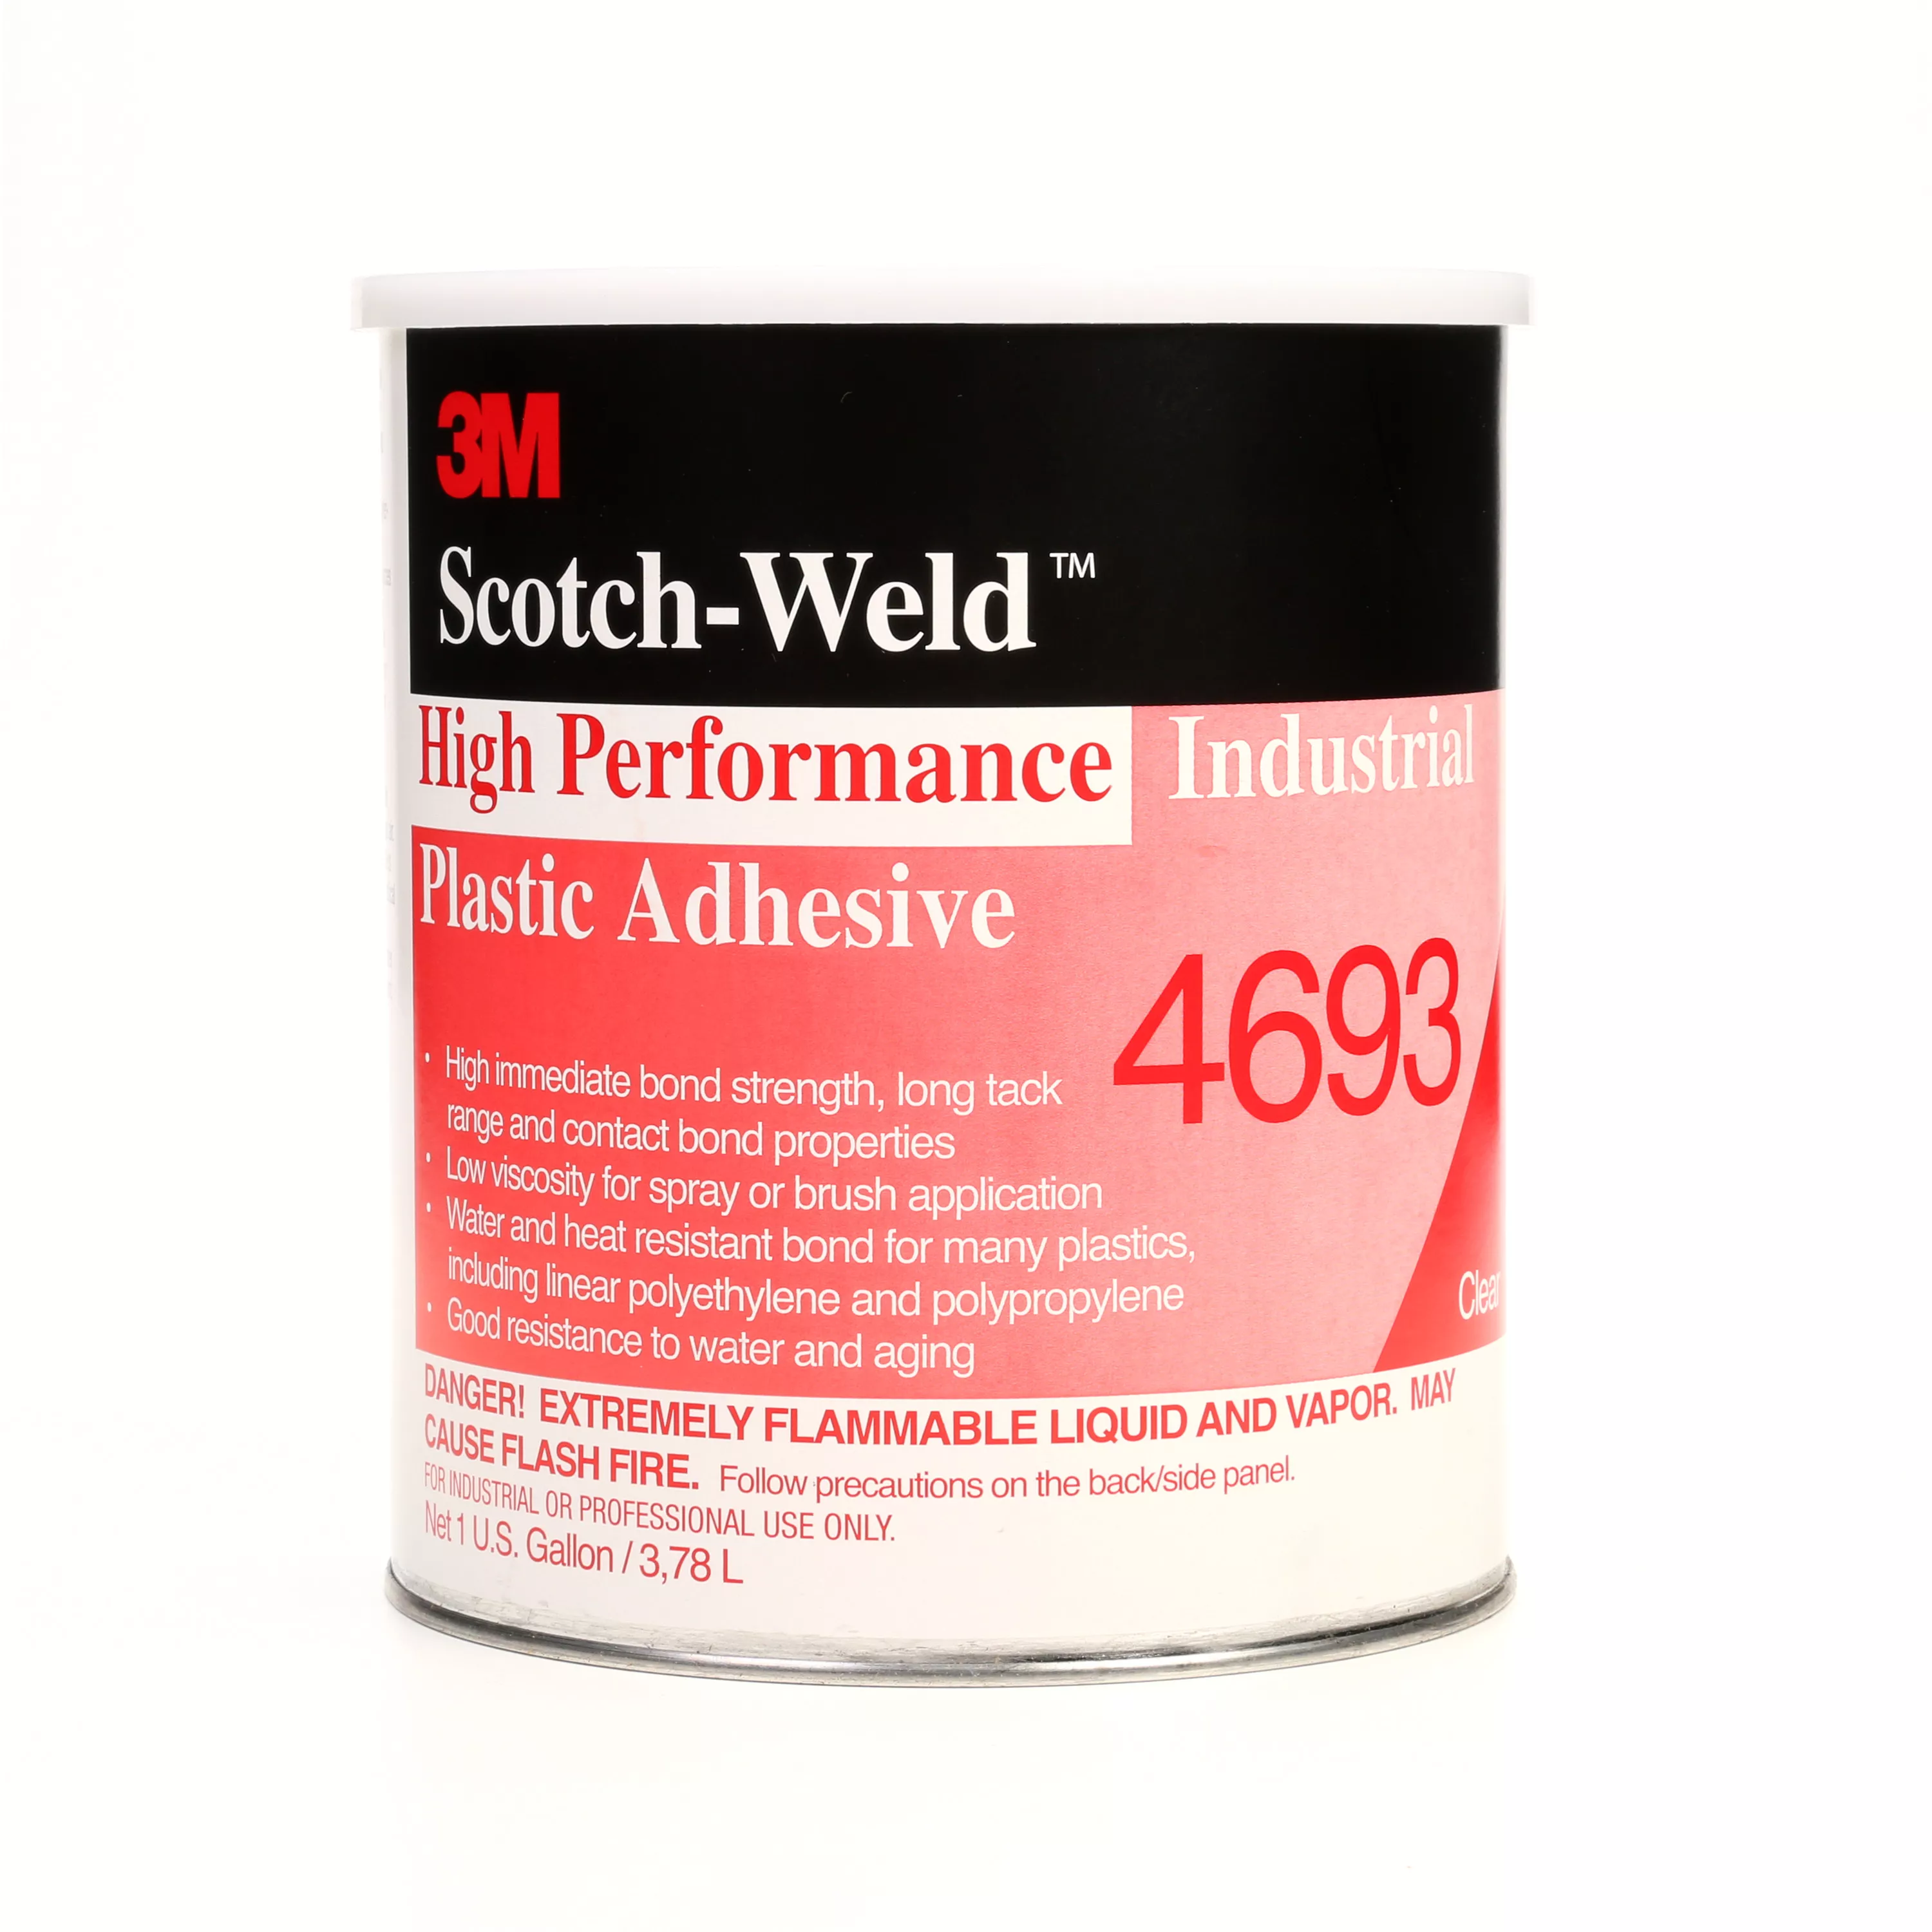 3M™ High Performance Industrial Plastic Adhesive 4693, Light Amber, 1
Gallon, 4 Can/Case